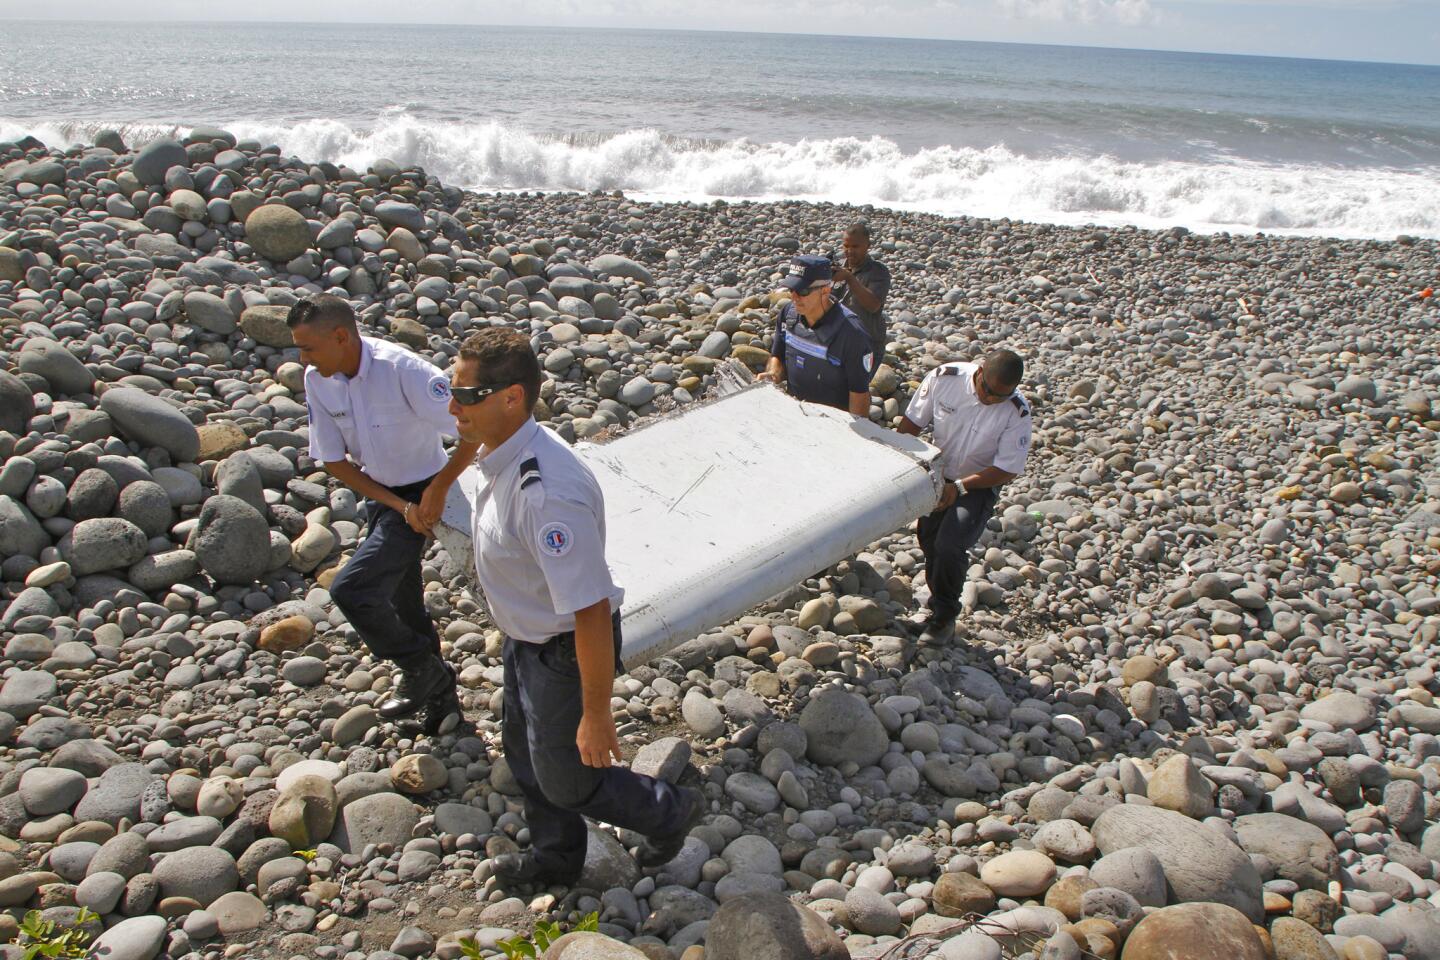 French police officers carry a piece of debris from a plane in Saint-Andre, Reunion Island. Air safety investigators, one of them a Boeing investigator, have identified the component as a "flaperon" from the trailing edge of a Boeing 777 wing, a U.S. official said. Malaysian Airlines Flight 370, which disappeared March 8, 2014, with 239 people on board, is the only 777 known to be missing.